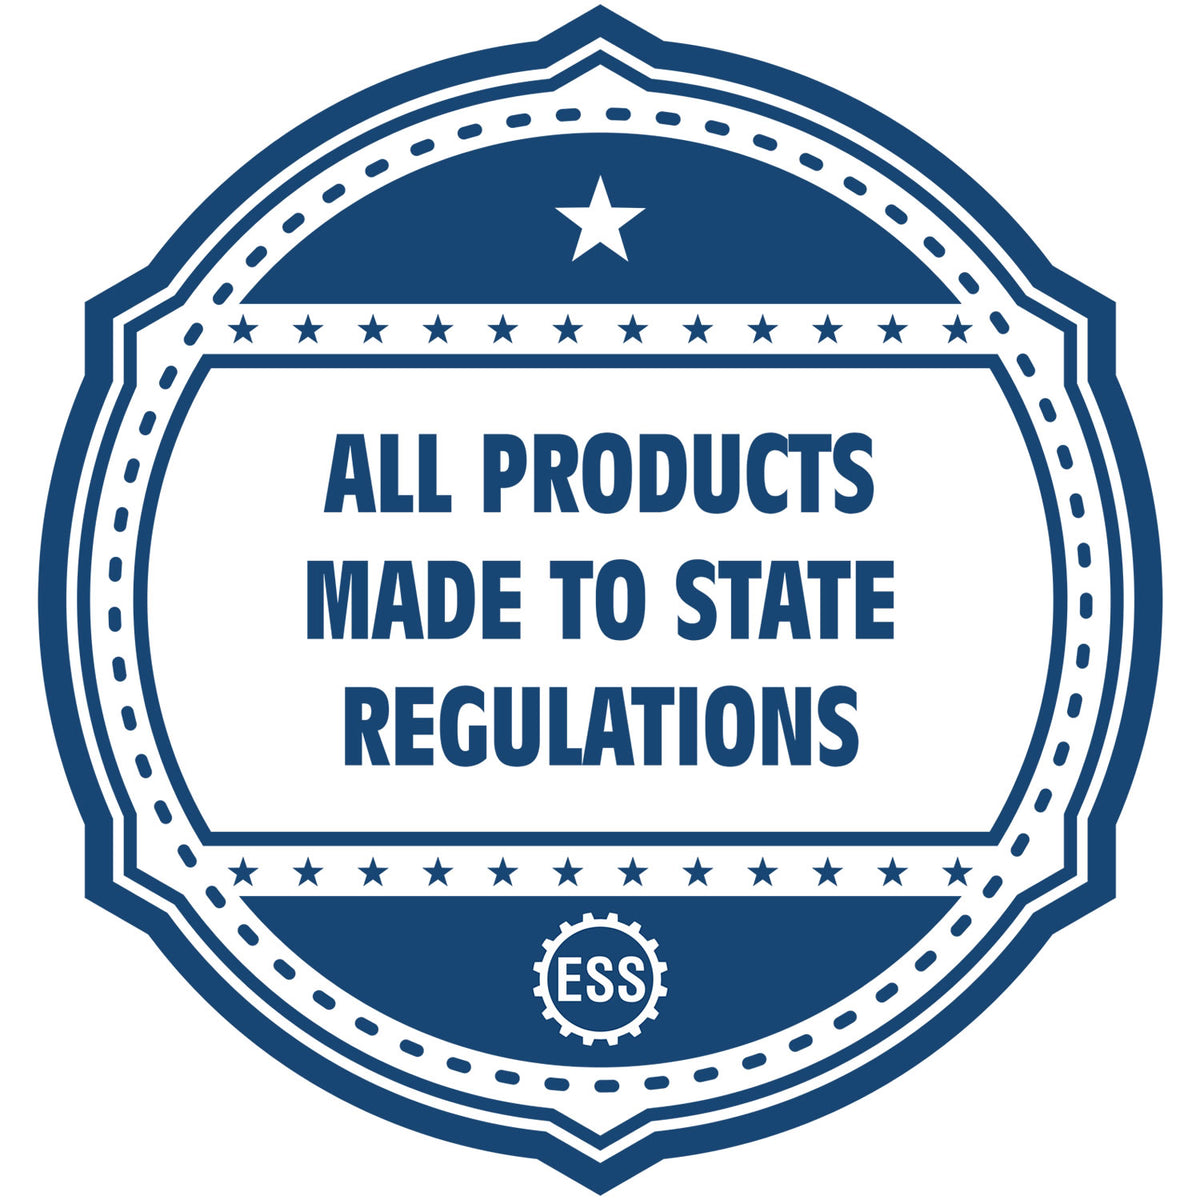 An icon or badge element for the State of Wyoming Long Reach Architectural Embossing Seal showing that this product is made in compliance with state regulations.